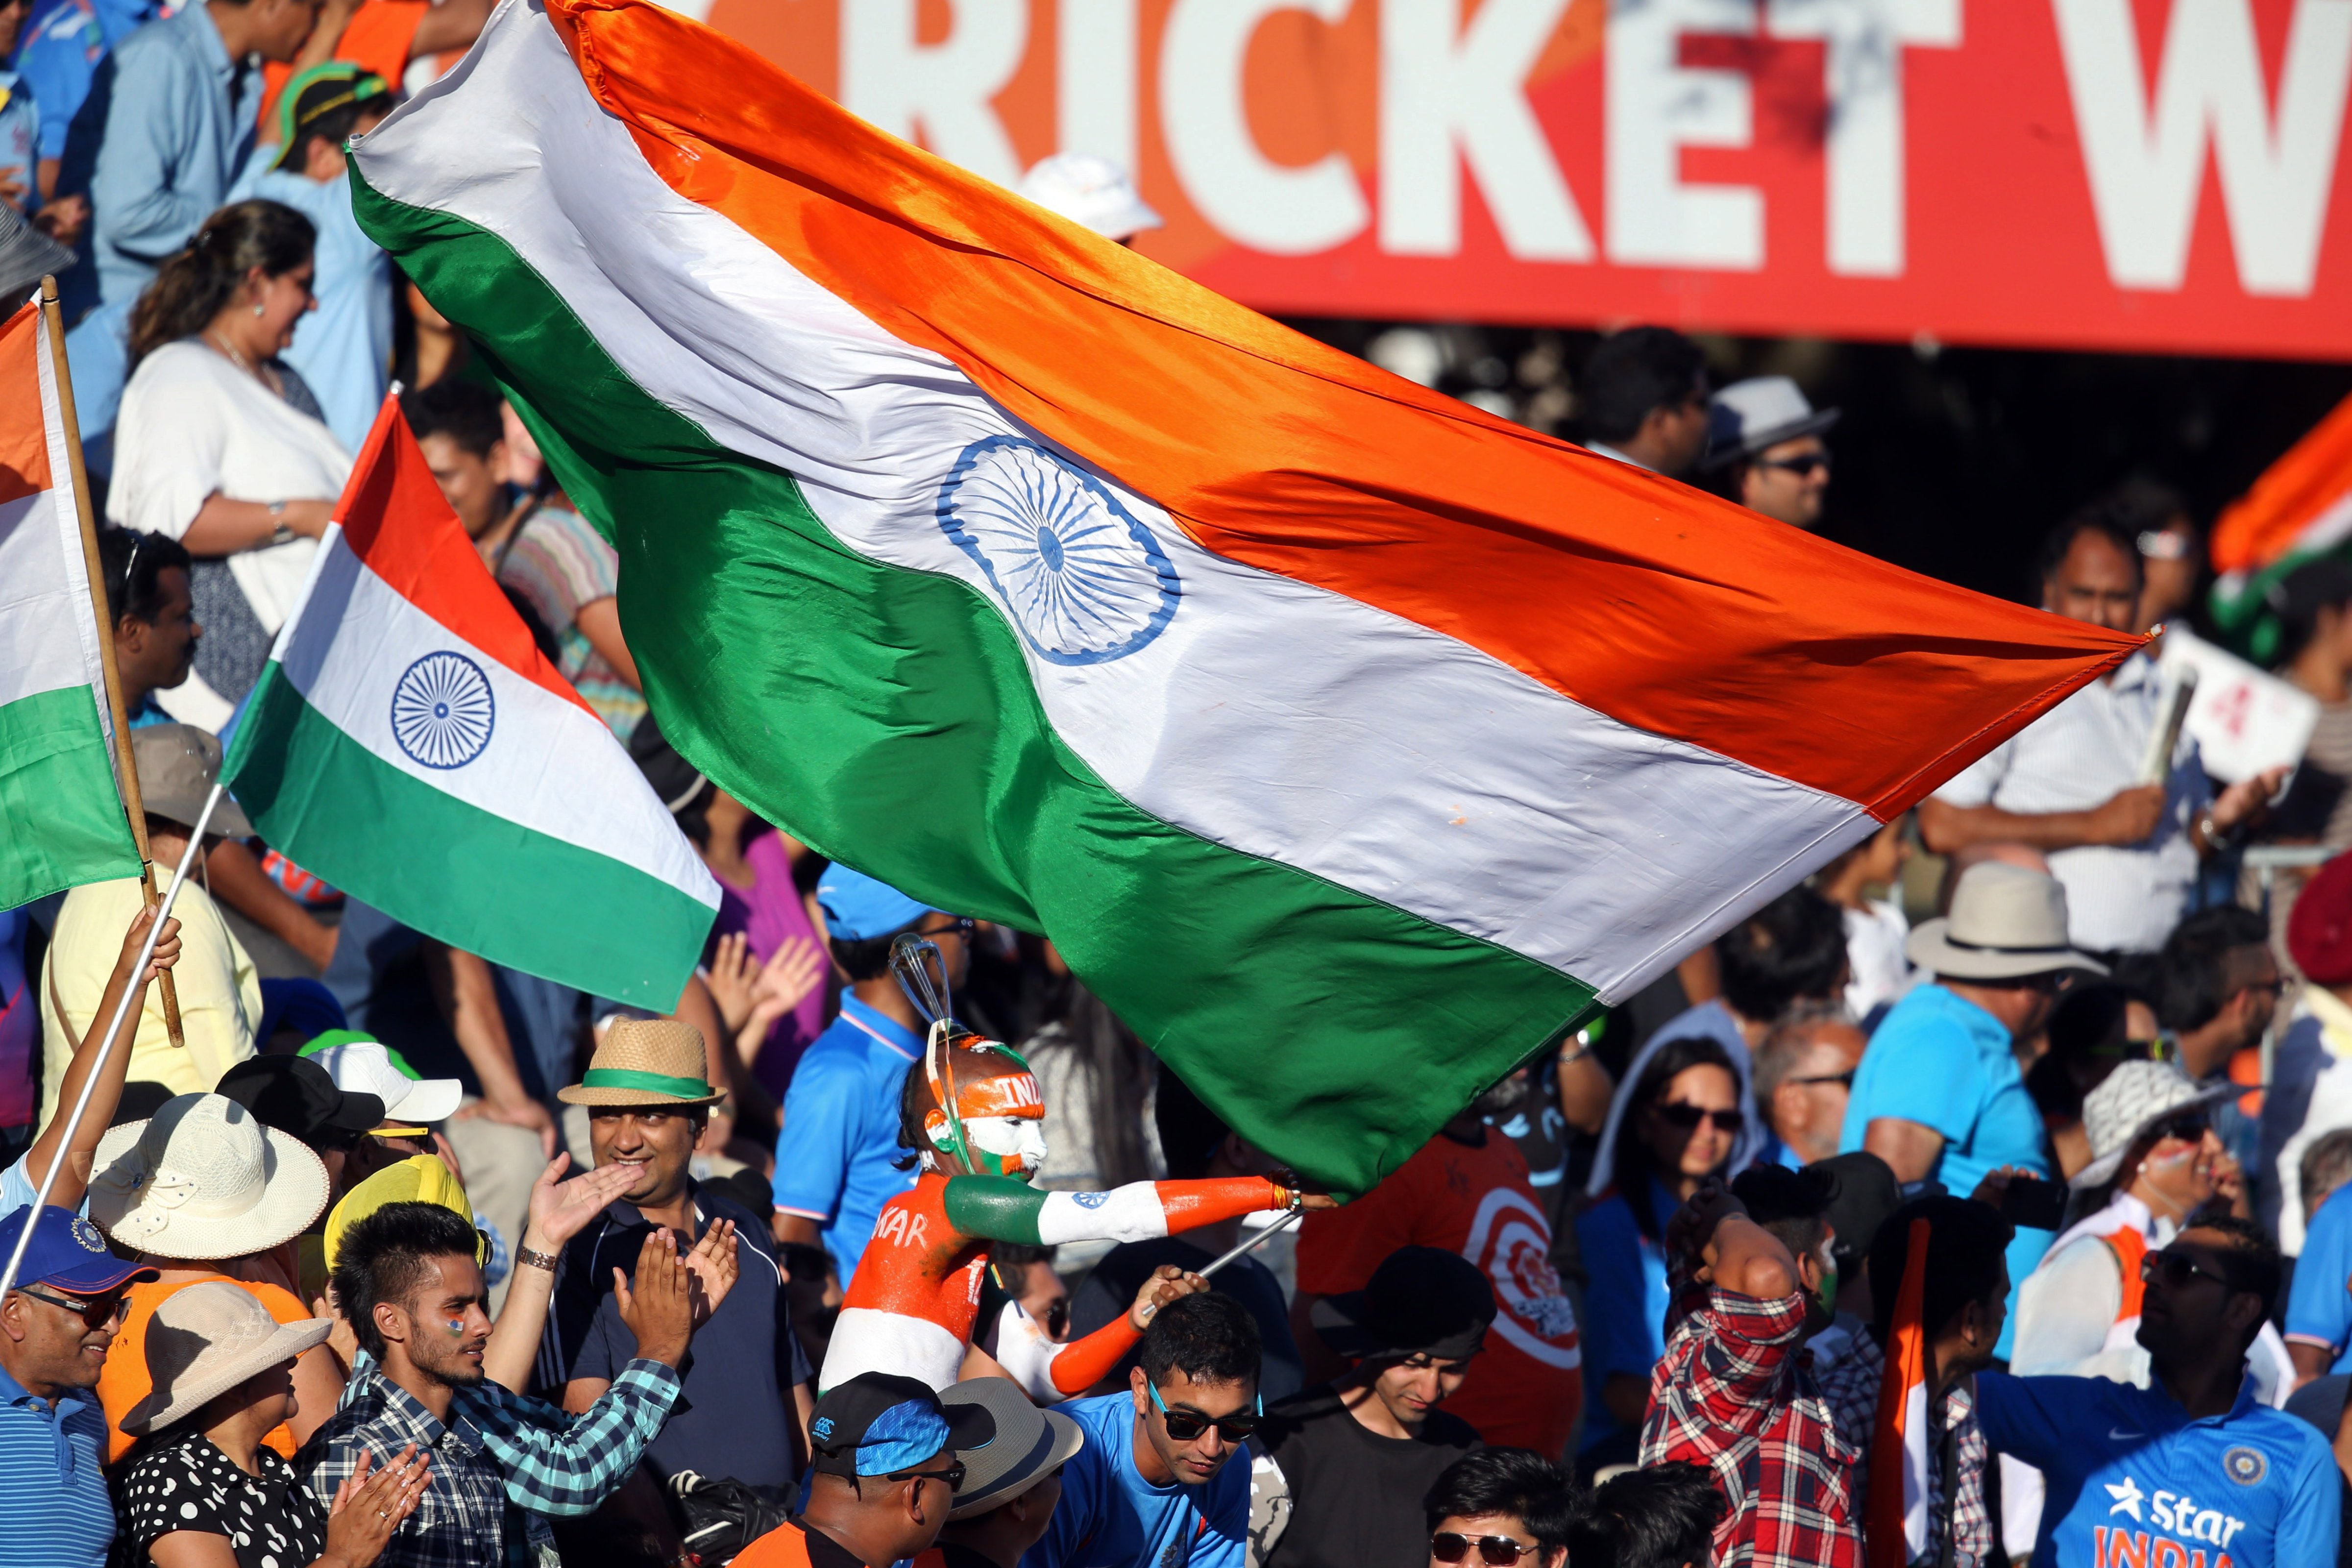 India fans wave their national flags during the Pool B Cricket World Cup match between India and Ireland at Sedden Park in Hamilton on March 10, 2015.  (MICHAEL BRADLEY—AFP/Getty Images)